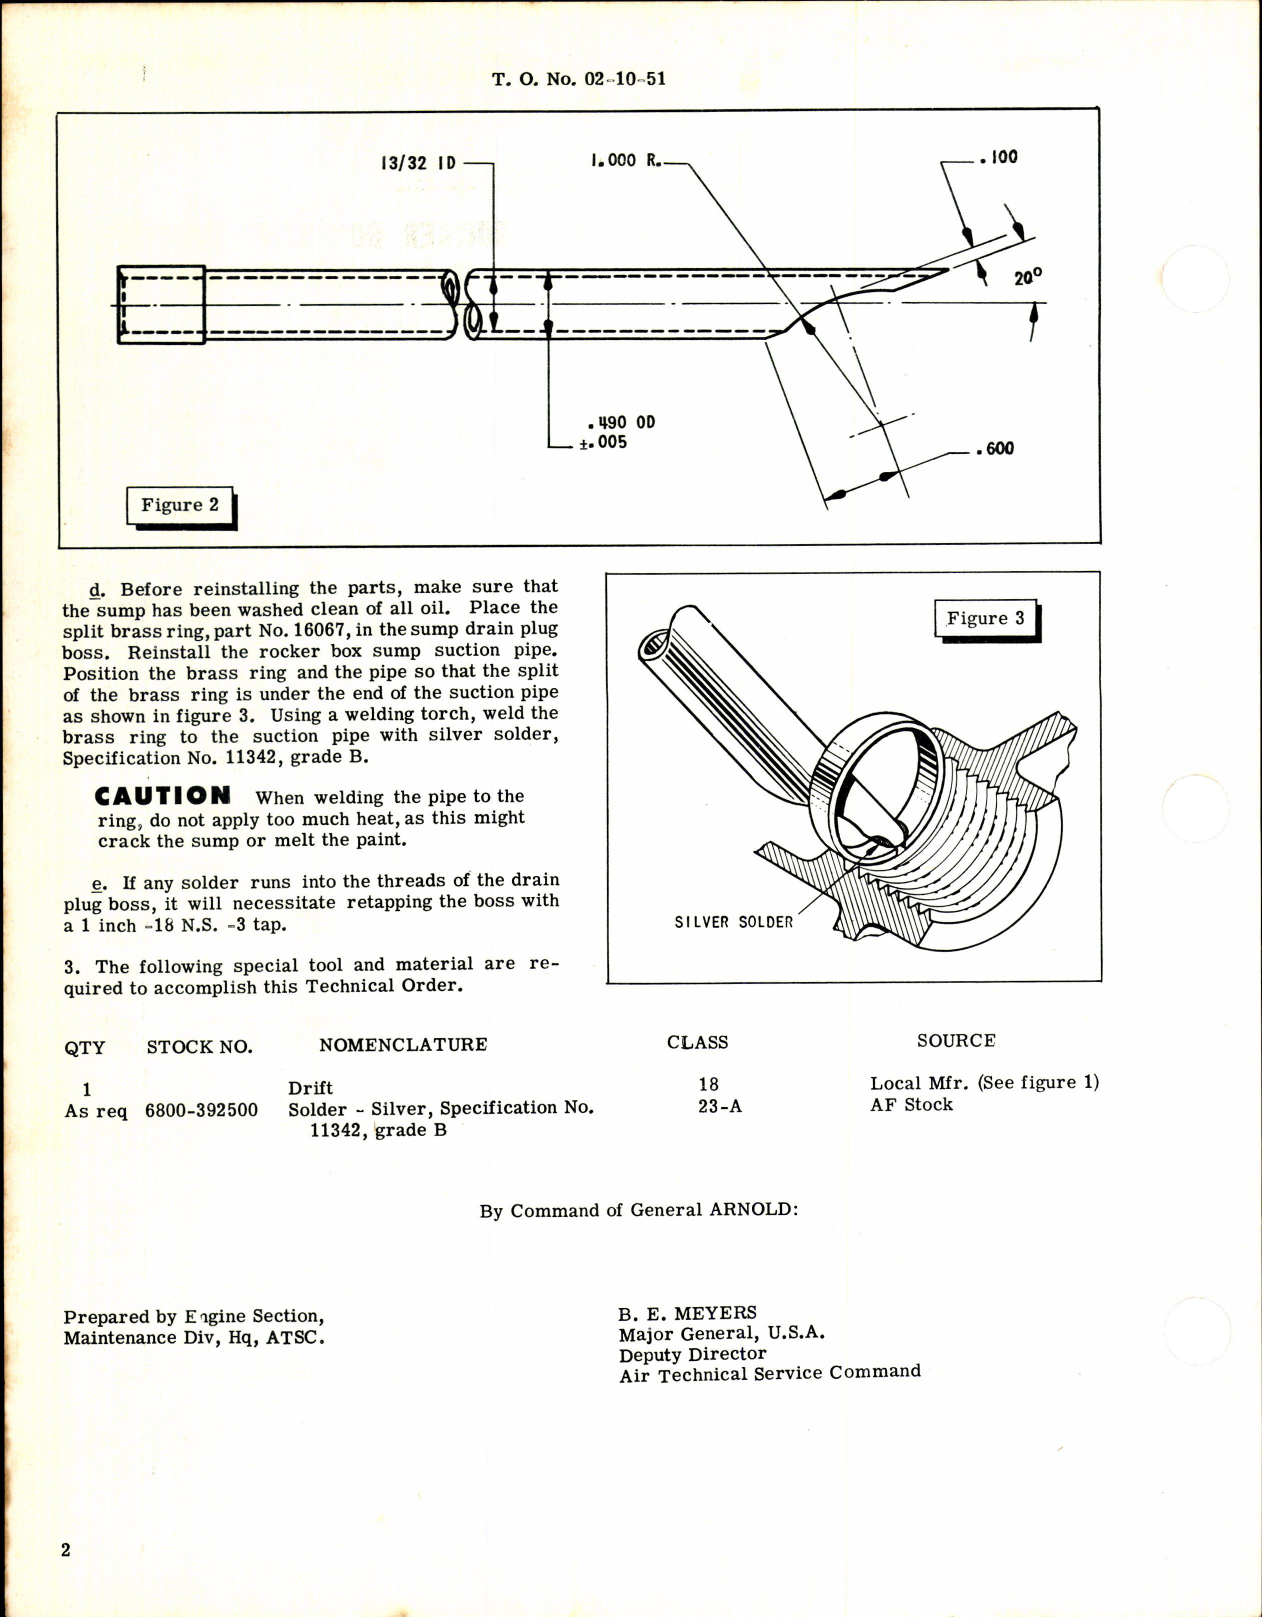 Sample page 2 from AirCorps Library document: Modification, Rocker Sump Suction Pipe for R-1830, R-2000 & R-2800